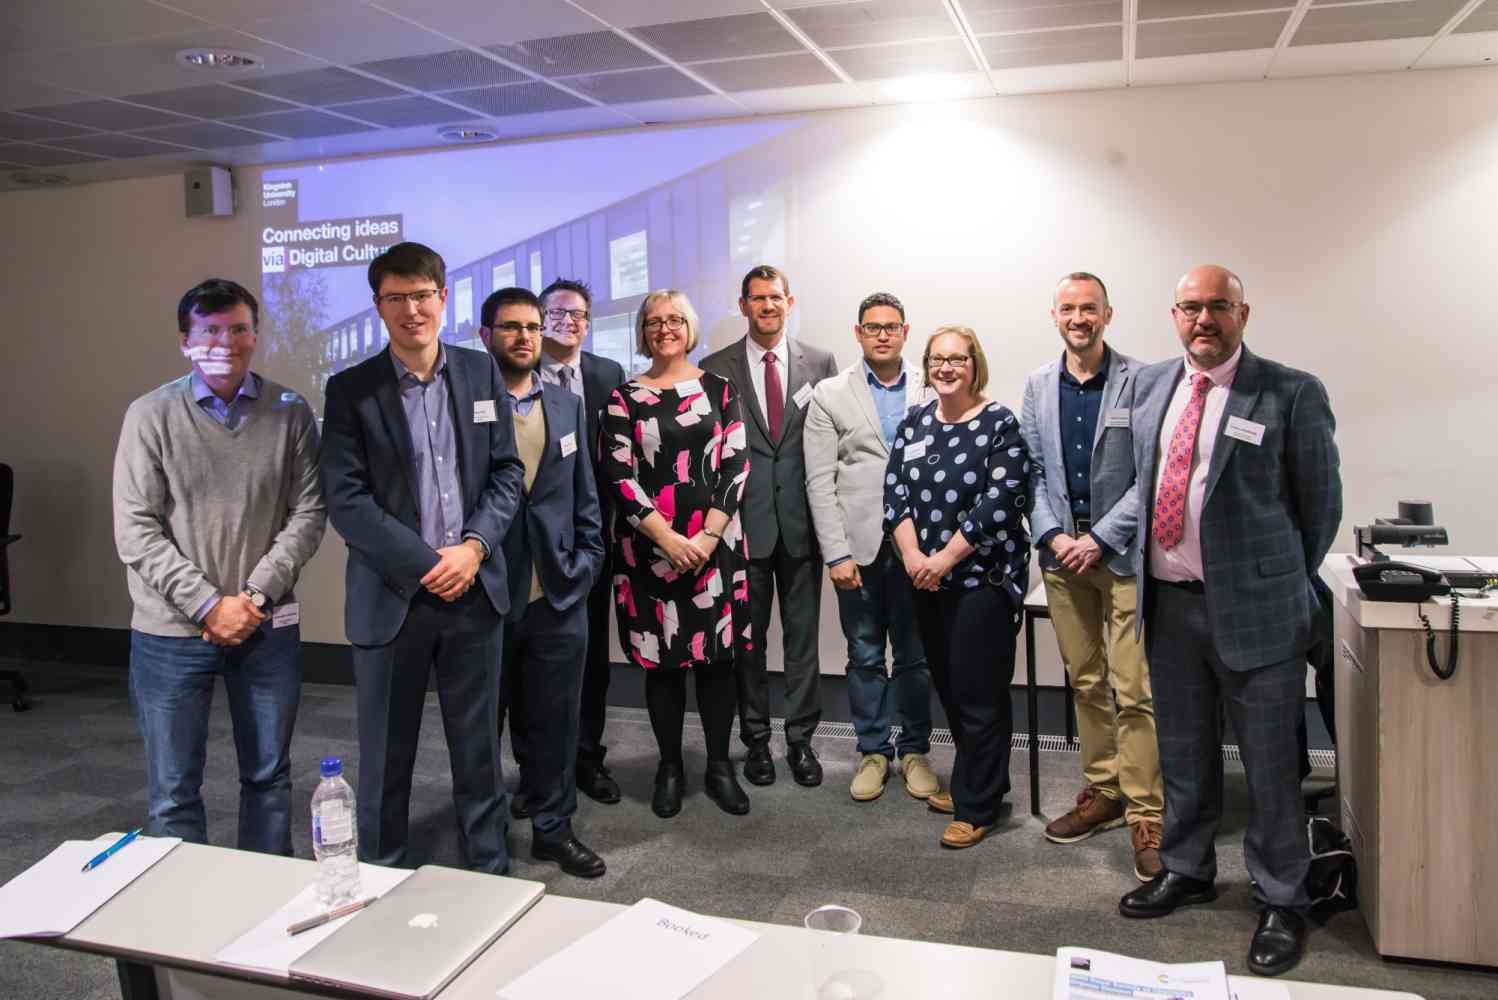 2020 RSC Organic Division, London and South East Regional Meeting - Speakers and organising committee